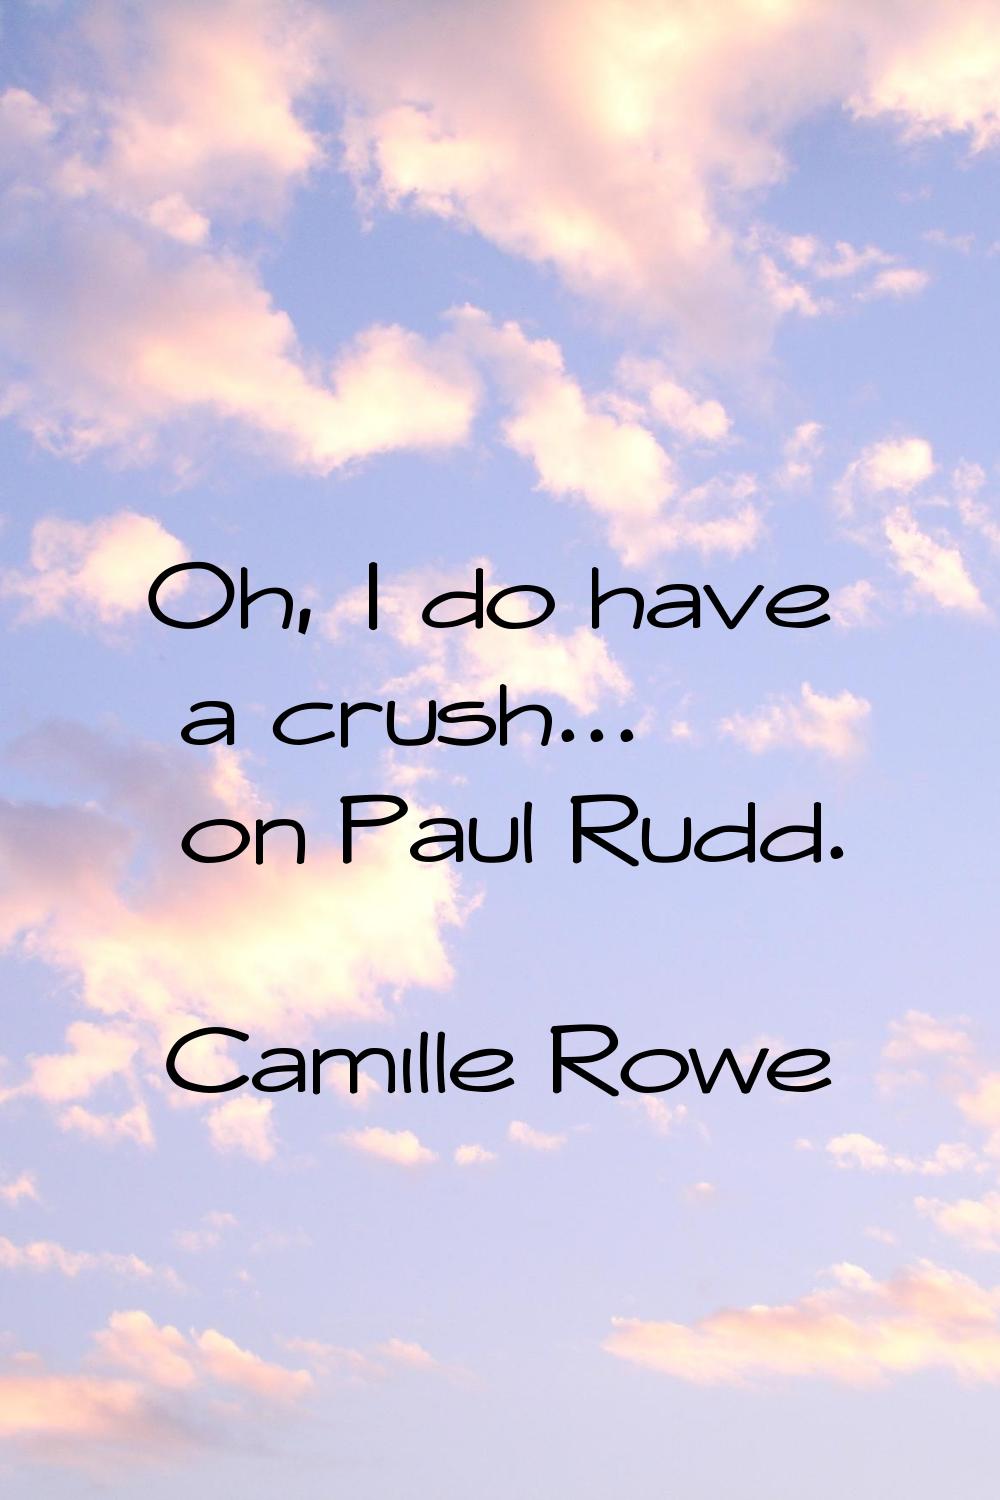 Oh, I do have a crush... on Paul Rudd.